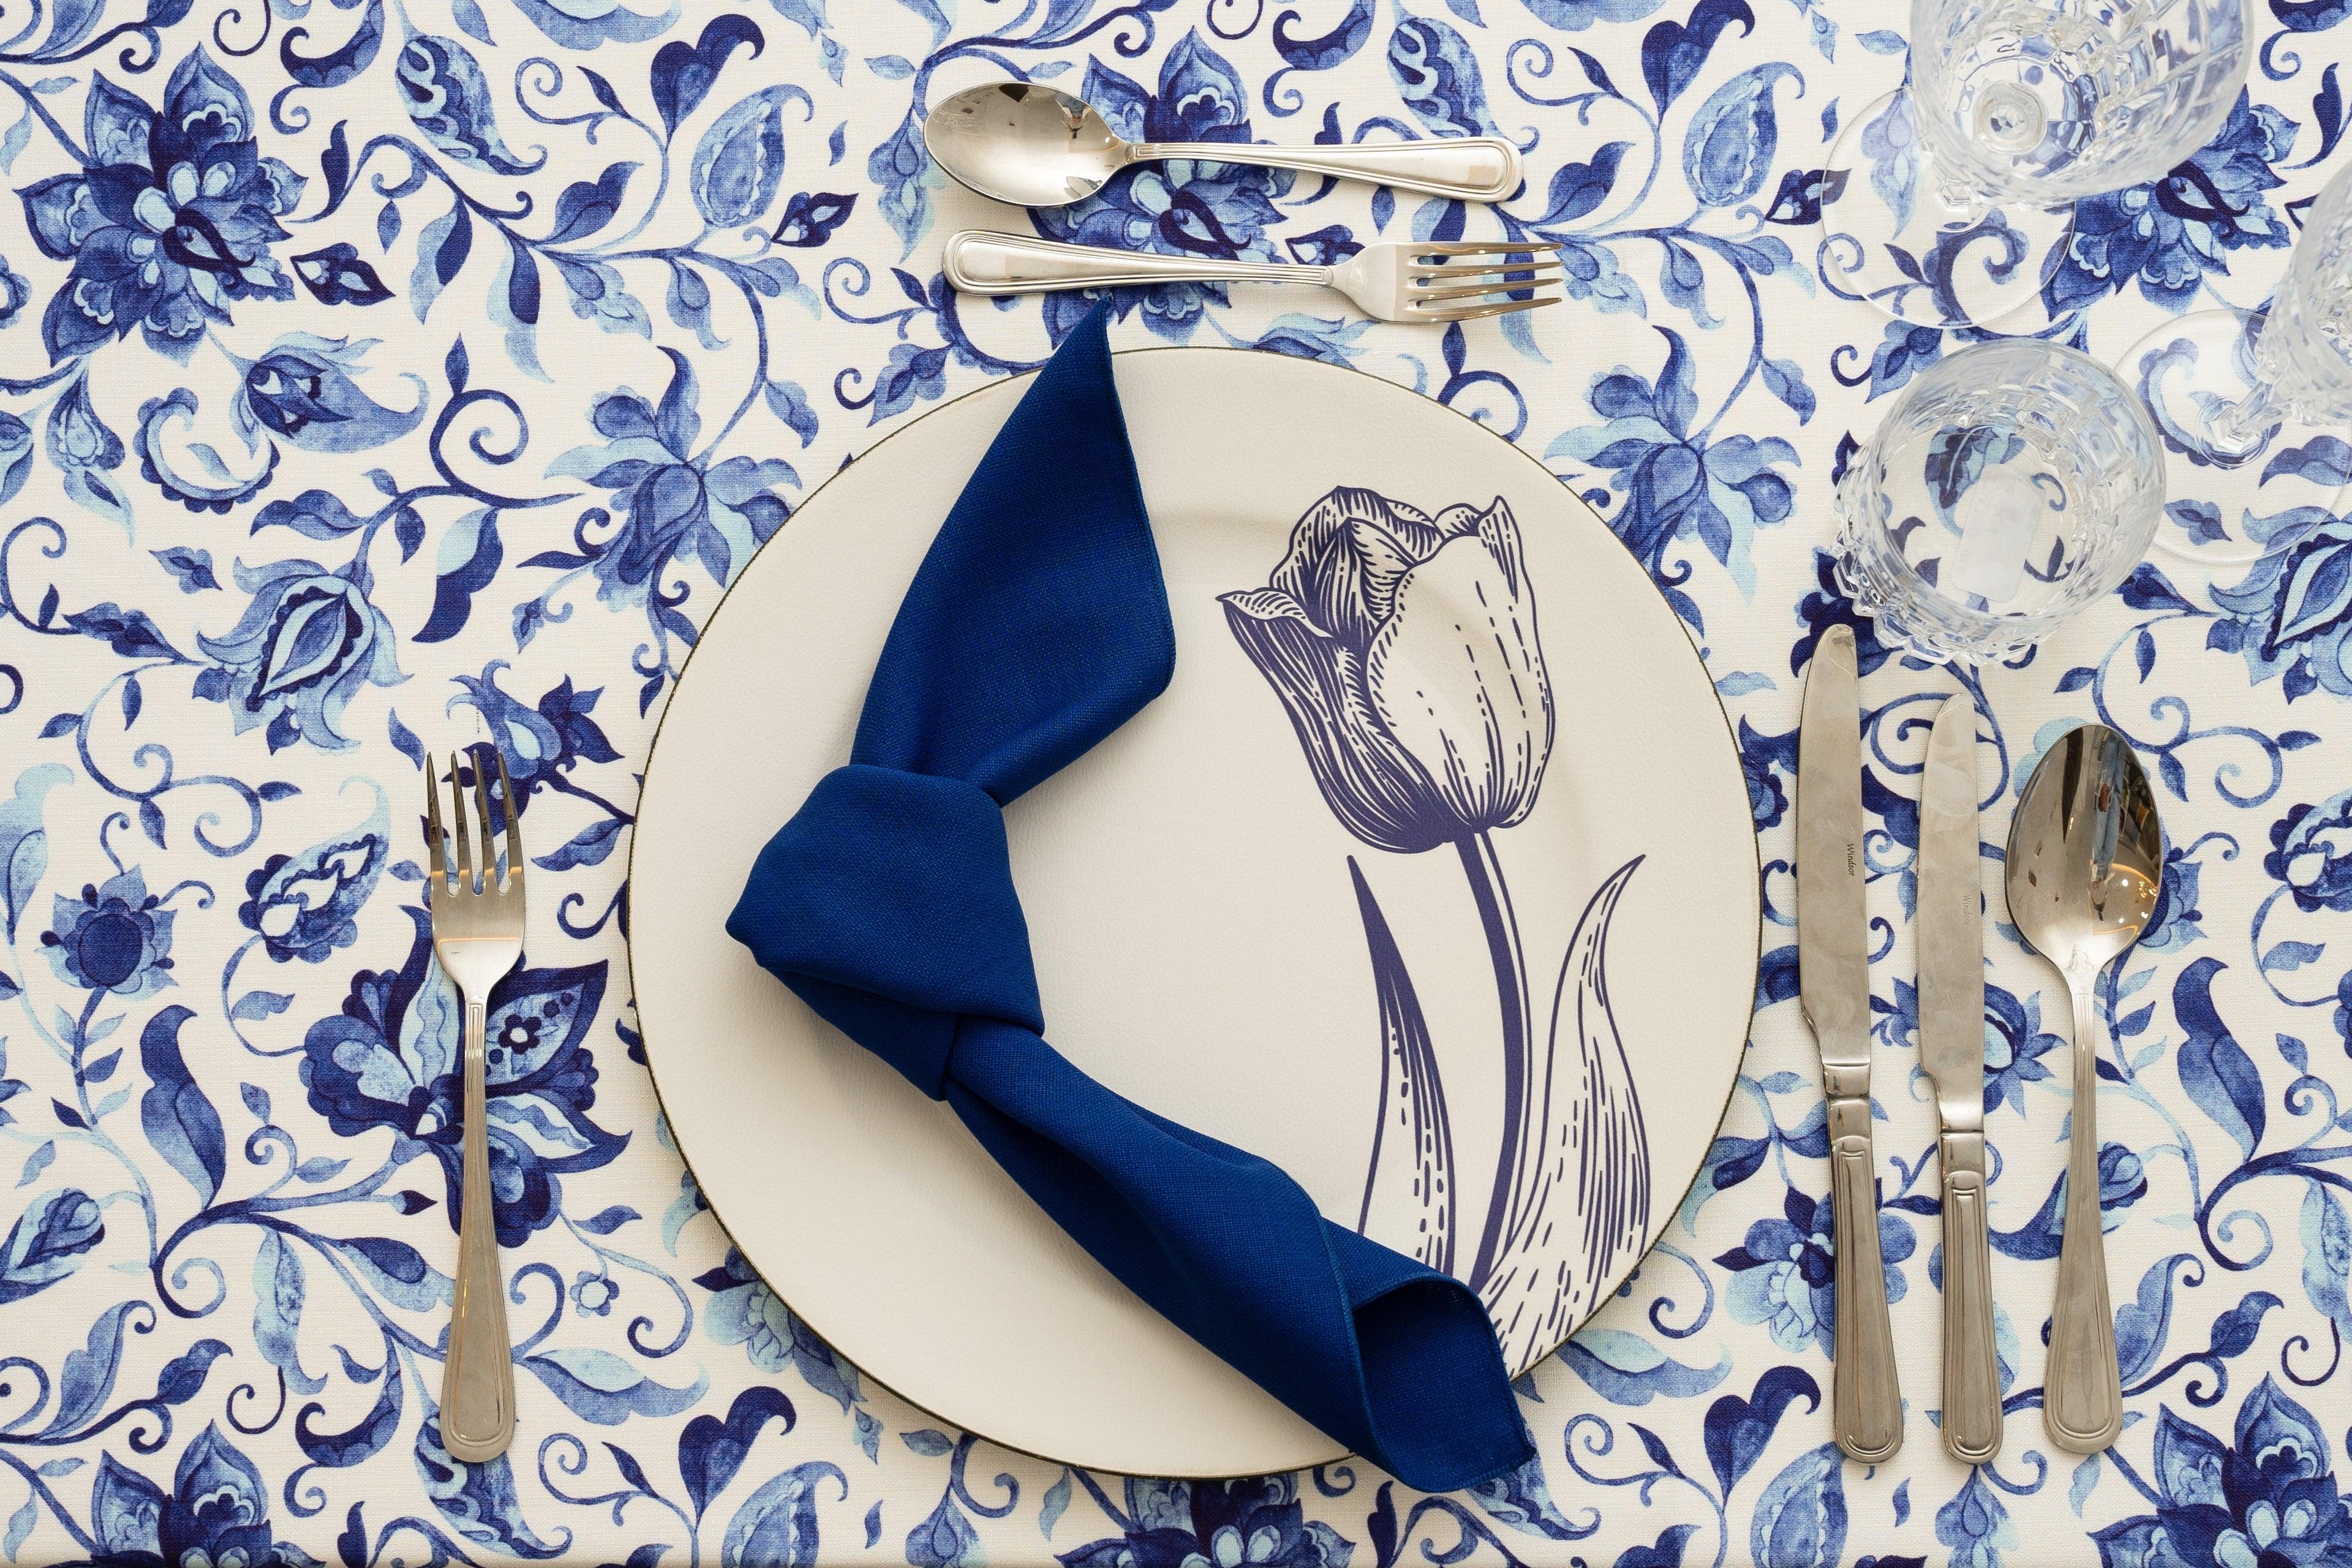 A plate with silverware and a napkin on a table, showcasing the Summer Florals Polyester Linen Tablecloth.